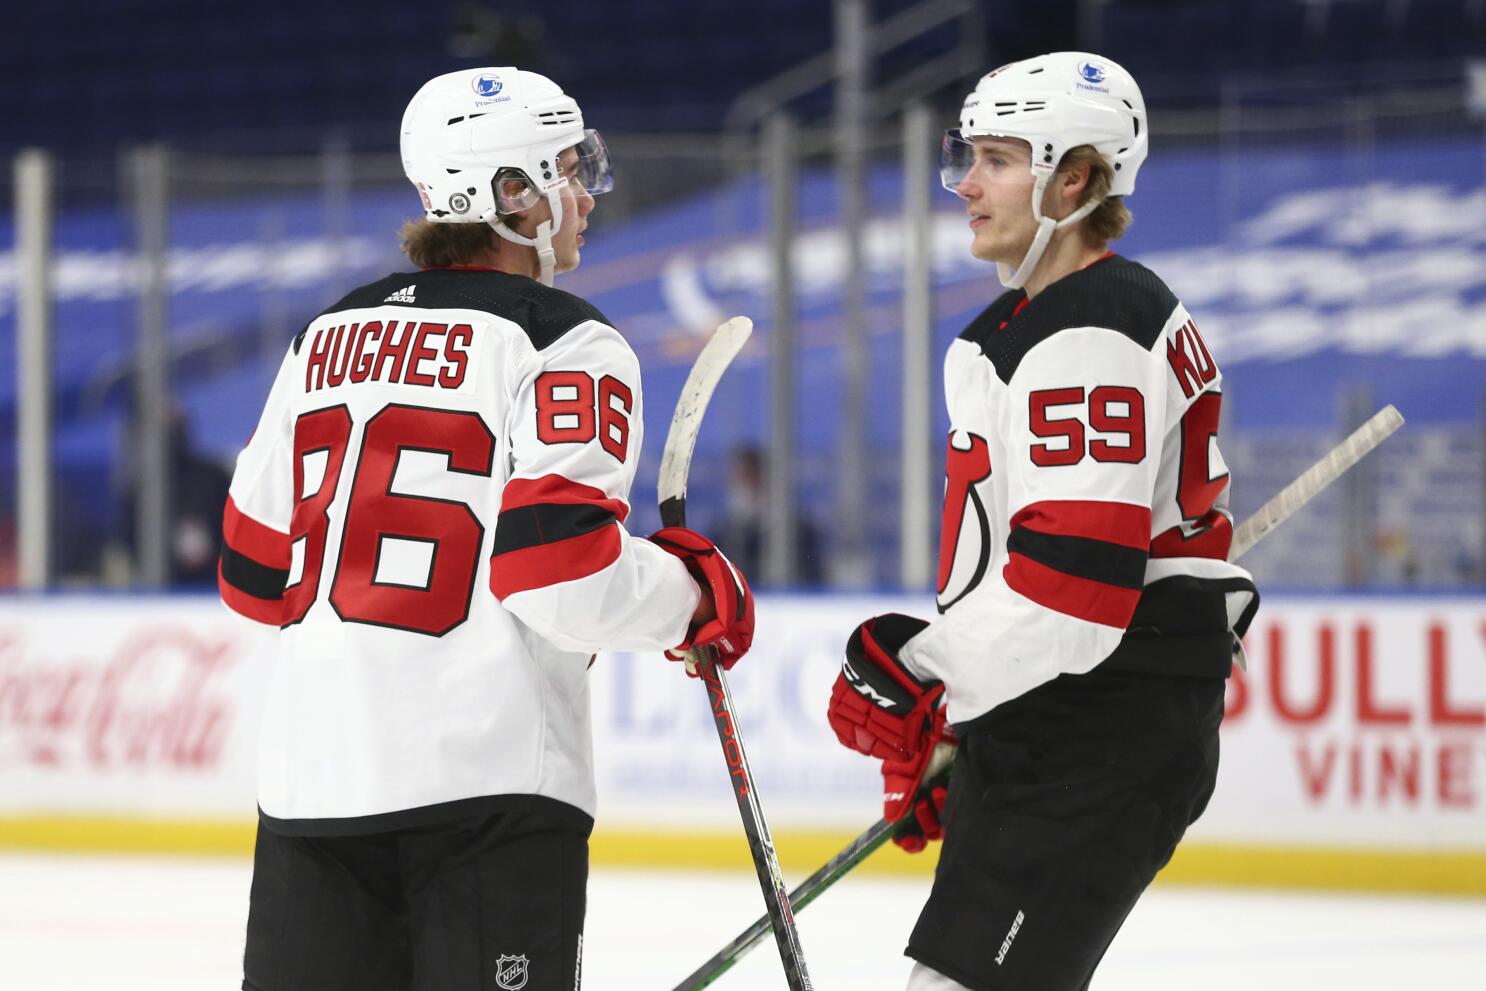 New Jersey Devils: Jack Hughes is the biggest disappointment of 2020